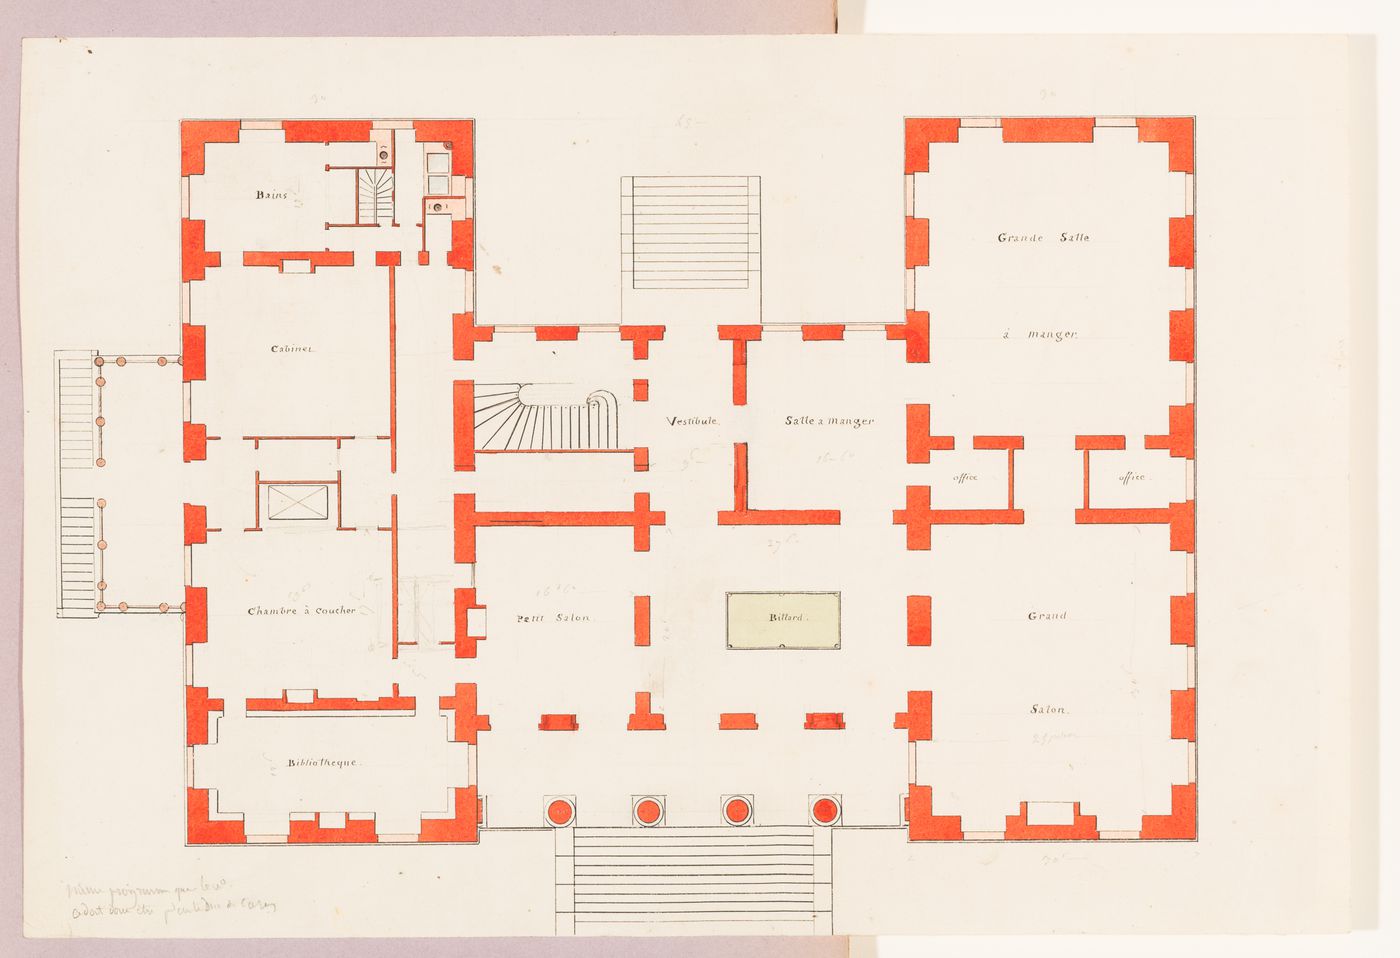 Ground floor plan plan for a country house for duc Decazes; verso: First floor plan for a two-storey country house